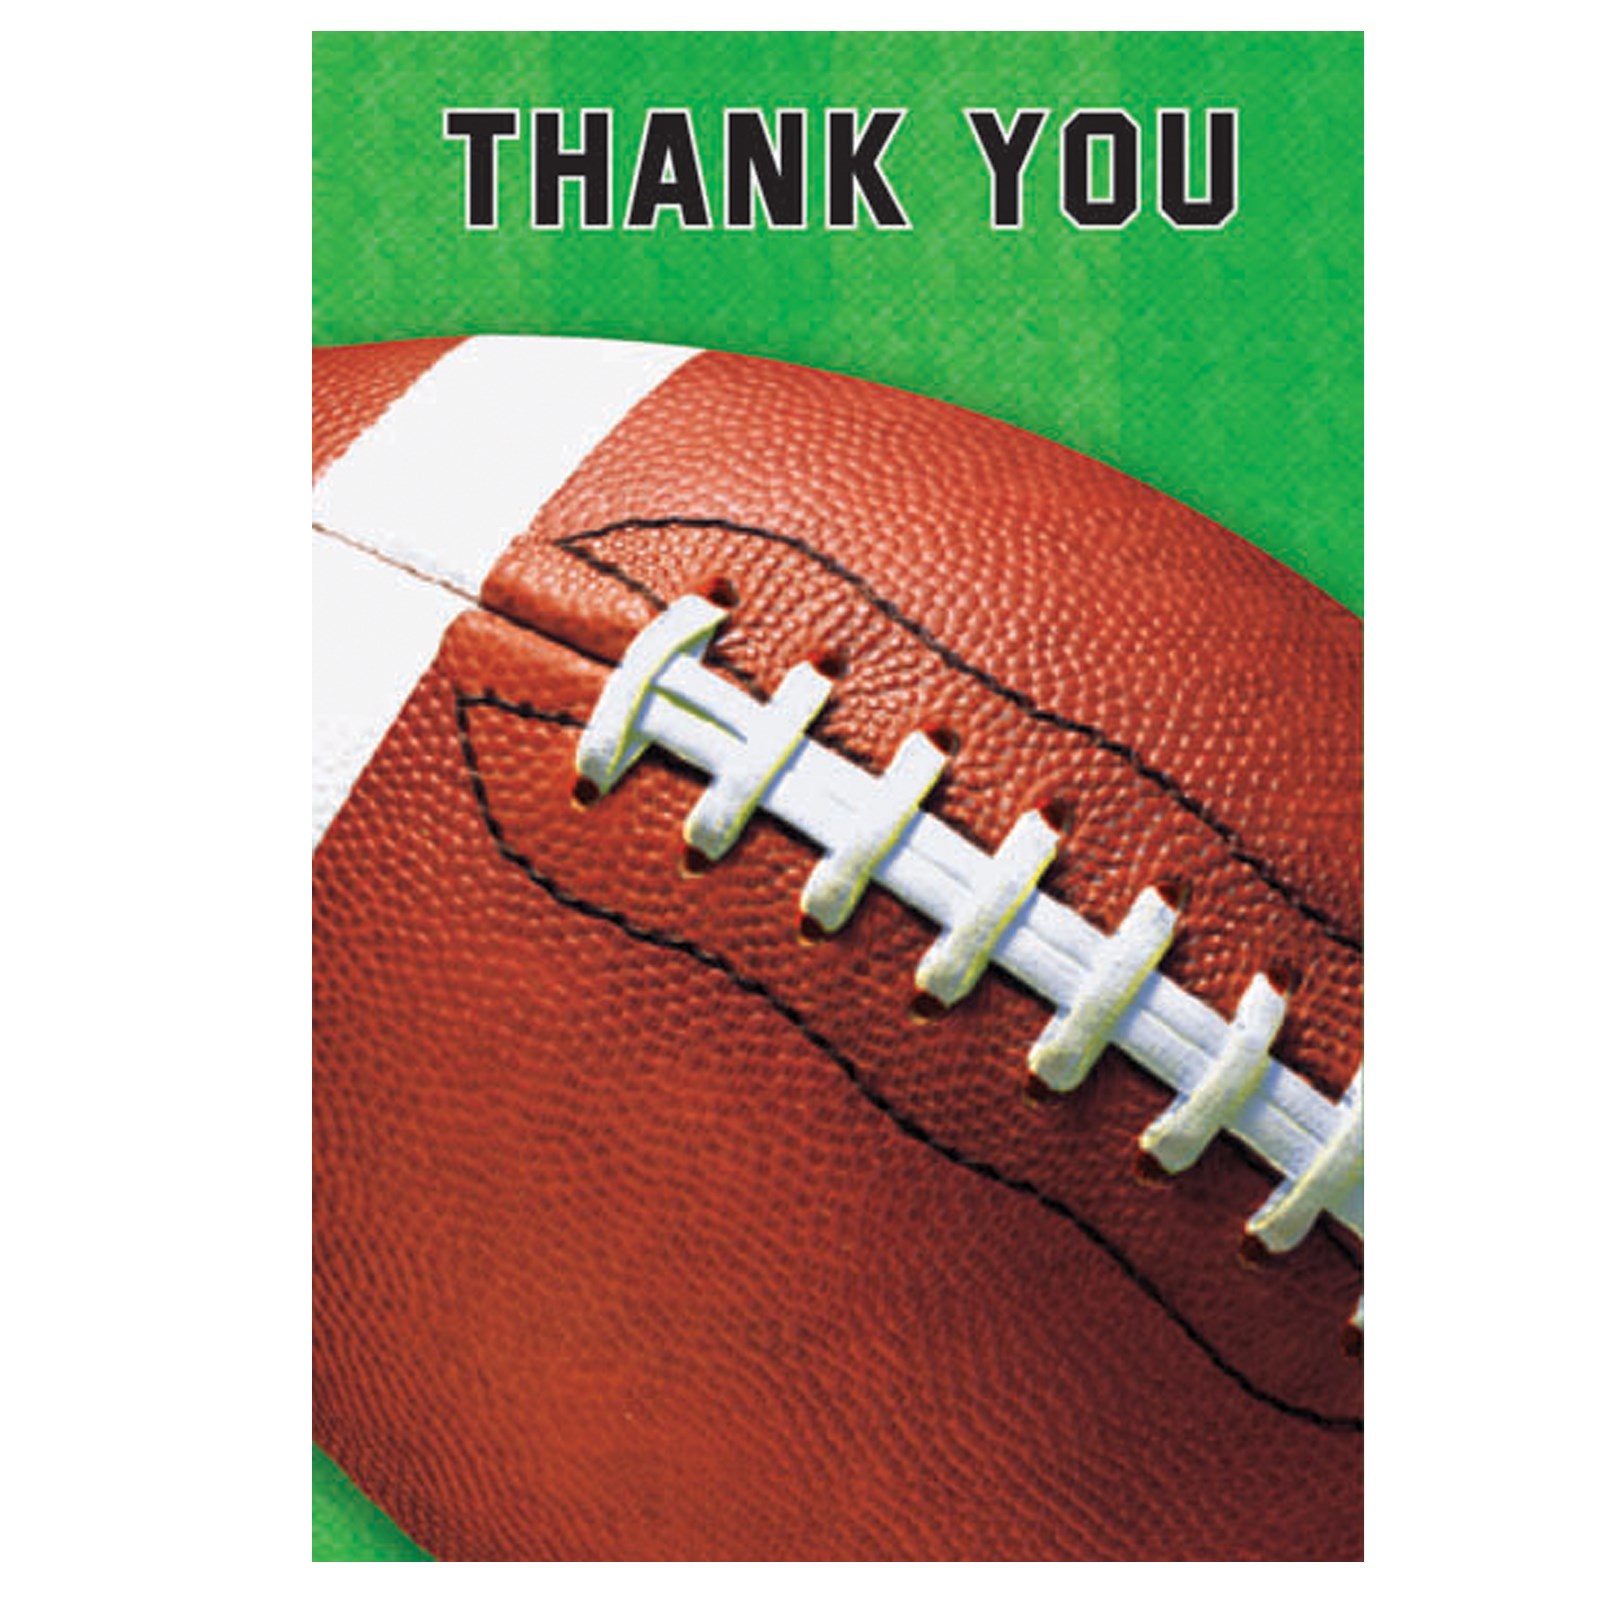 Football Fan - Thank You Cards 8 count